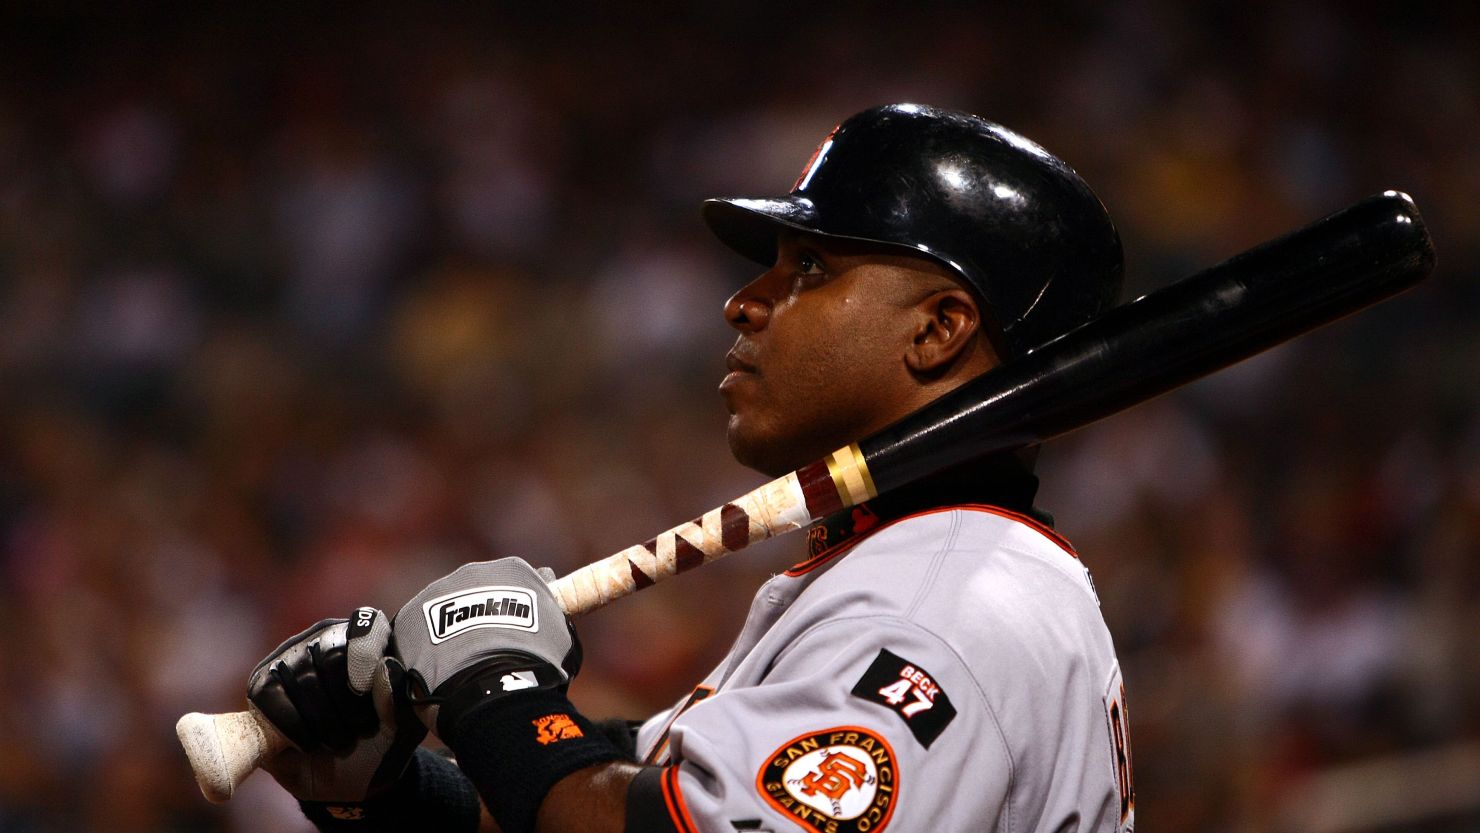 Barry Bonds, shown in 2007 when he played for San Francisco, hit 762 home runs, but was passed over for the Hall of Fame.